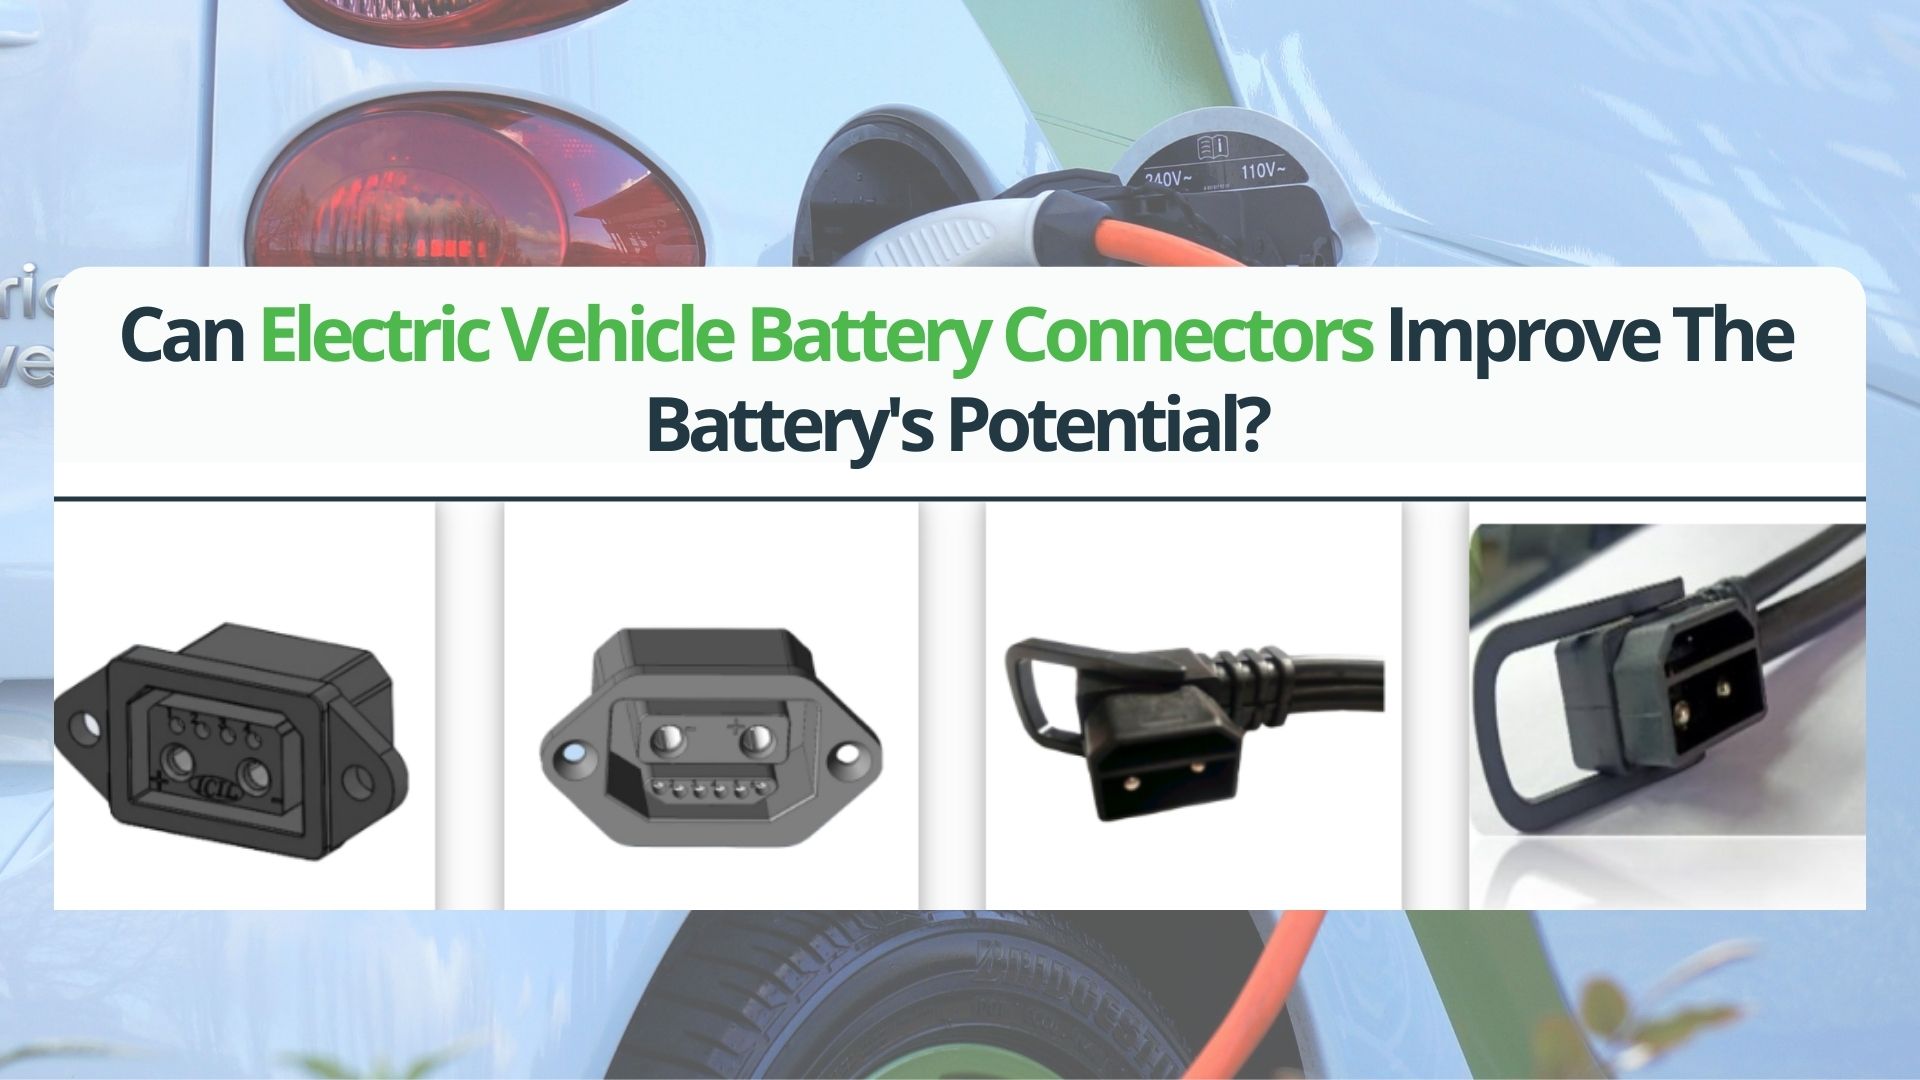 https://e-vehicleinfo.com/introduction-to-electric-vehicle-battery-connectors/